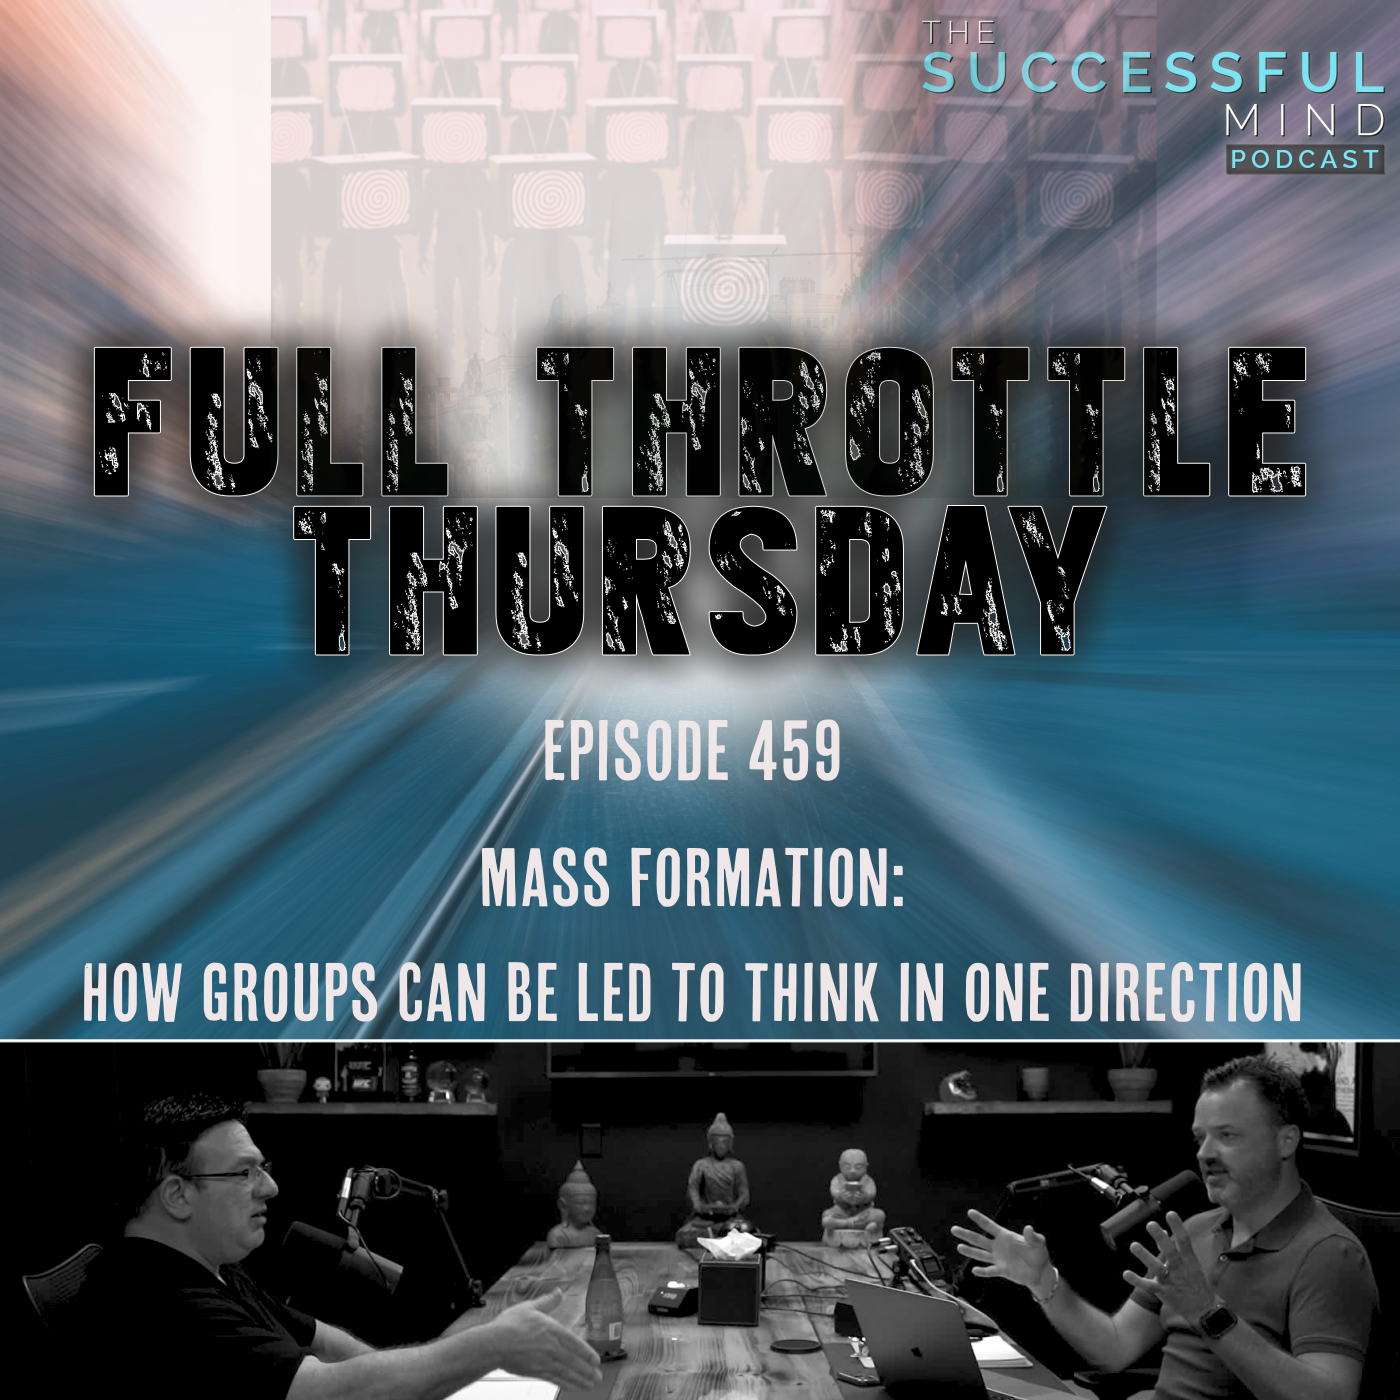 The Successful Mind Podcast - Full Throttle Thursday - Mass Formation: How Groups Can Be Led to Think in One Direction